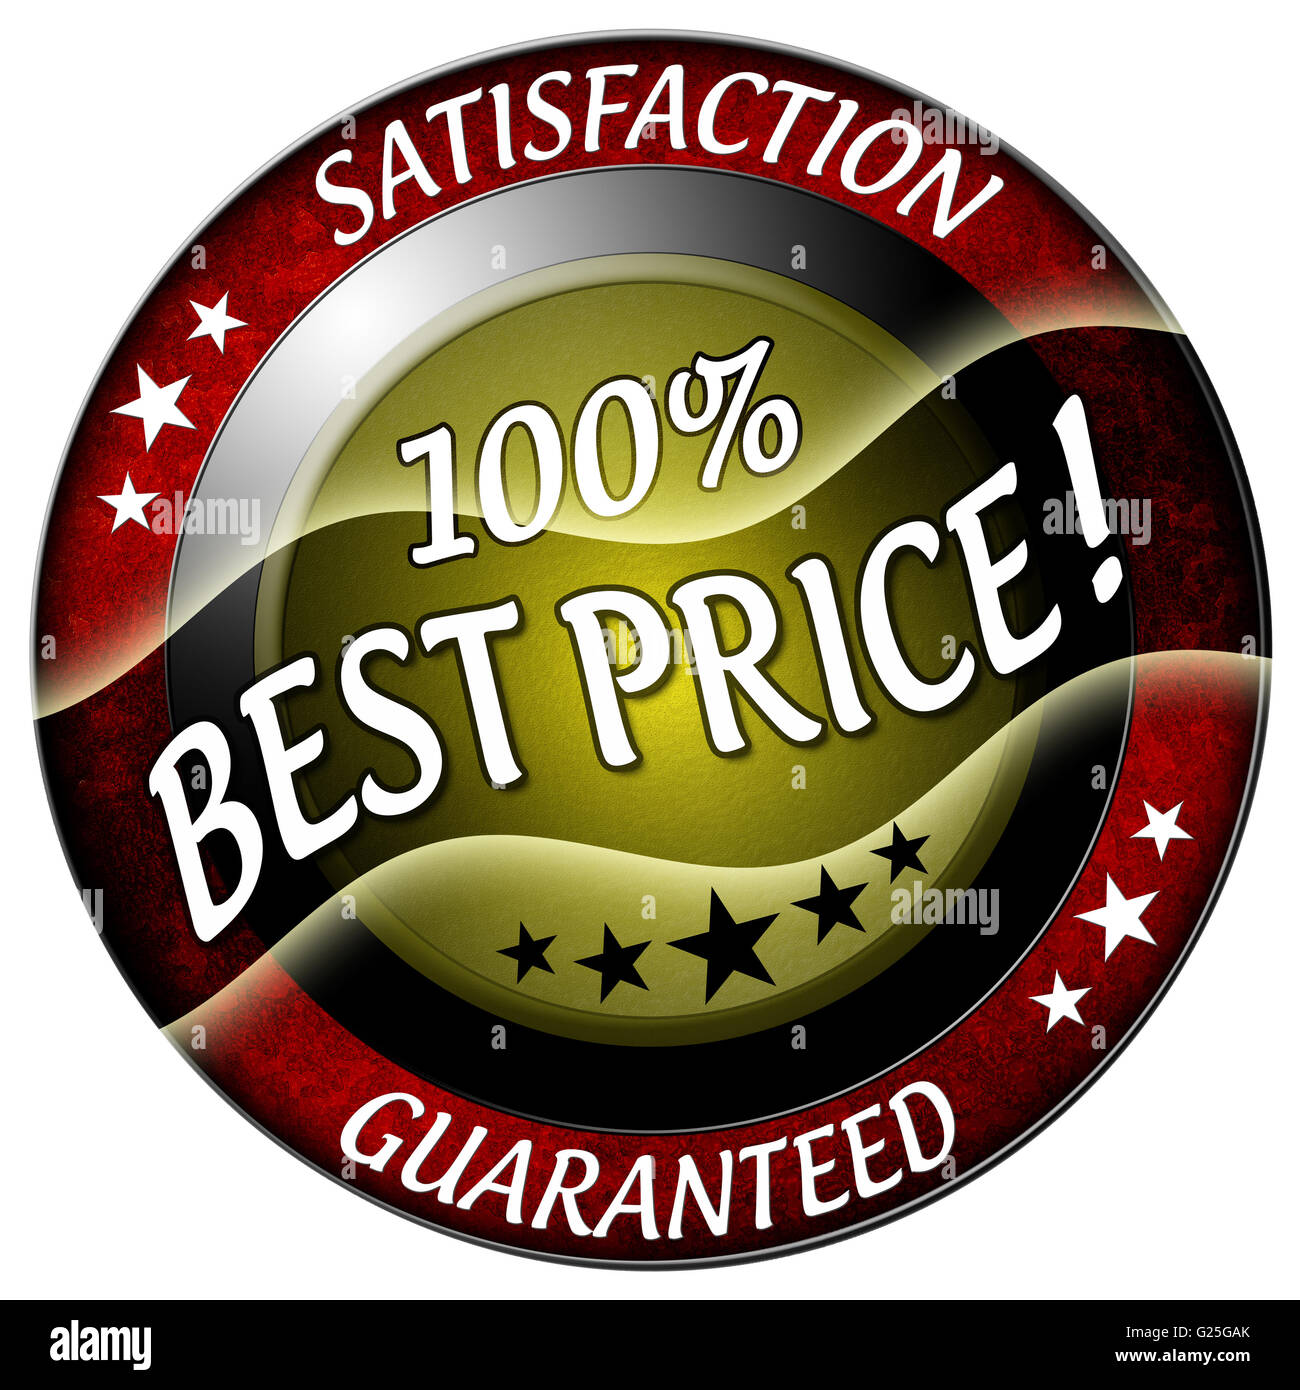 100 best price satisfaction and guaranteed icon isolated Stock Photo